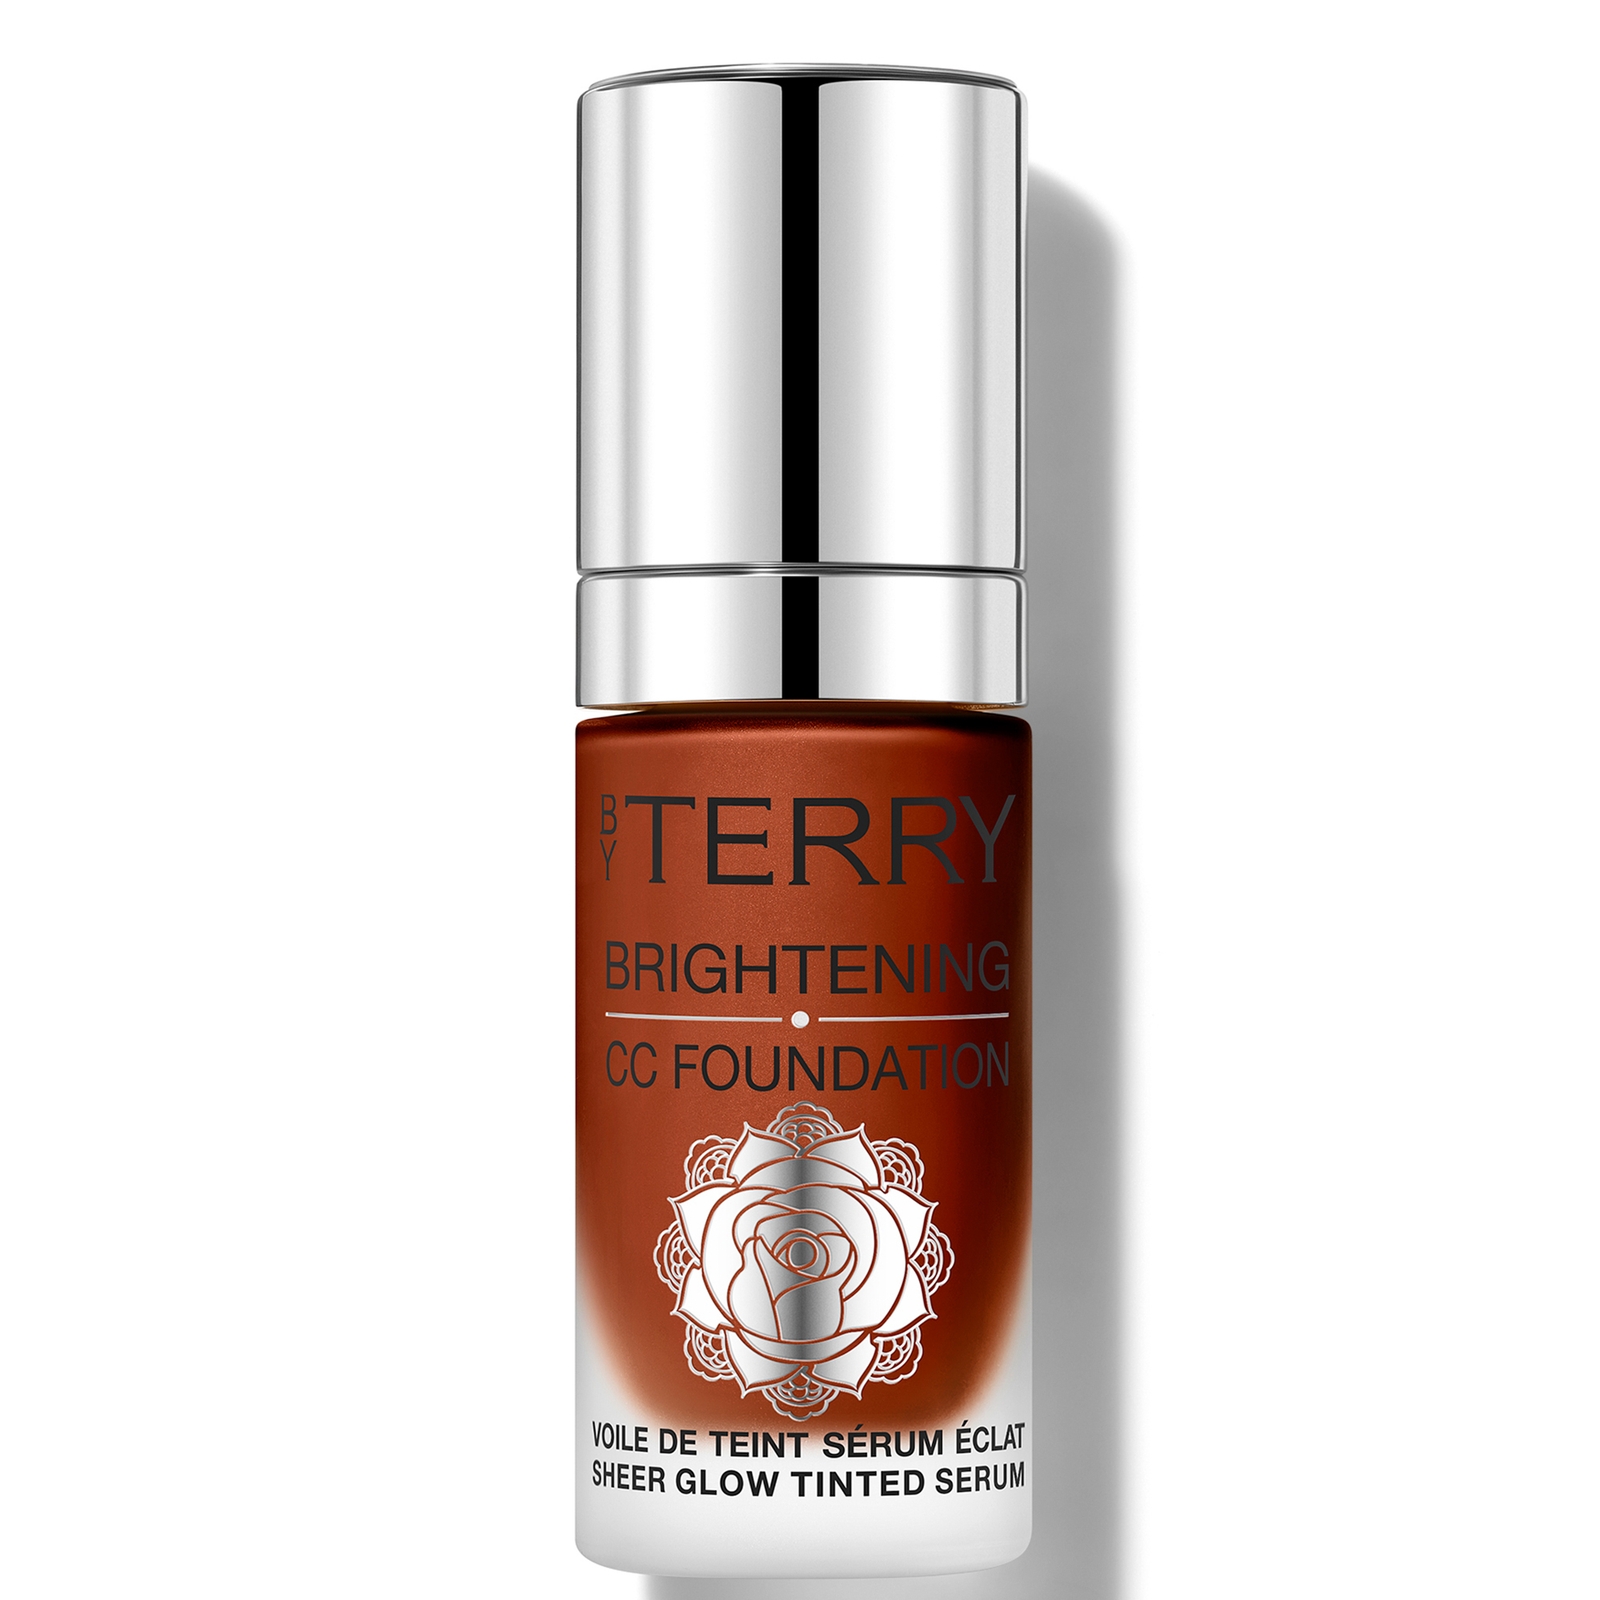 By Terry Brightening Cc Foundation 30ml (various Shades) - 8c - Deep Cool In Brown